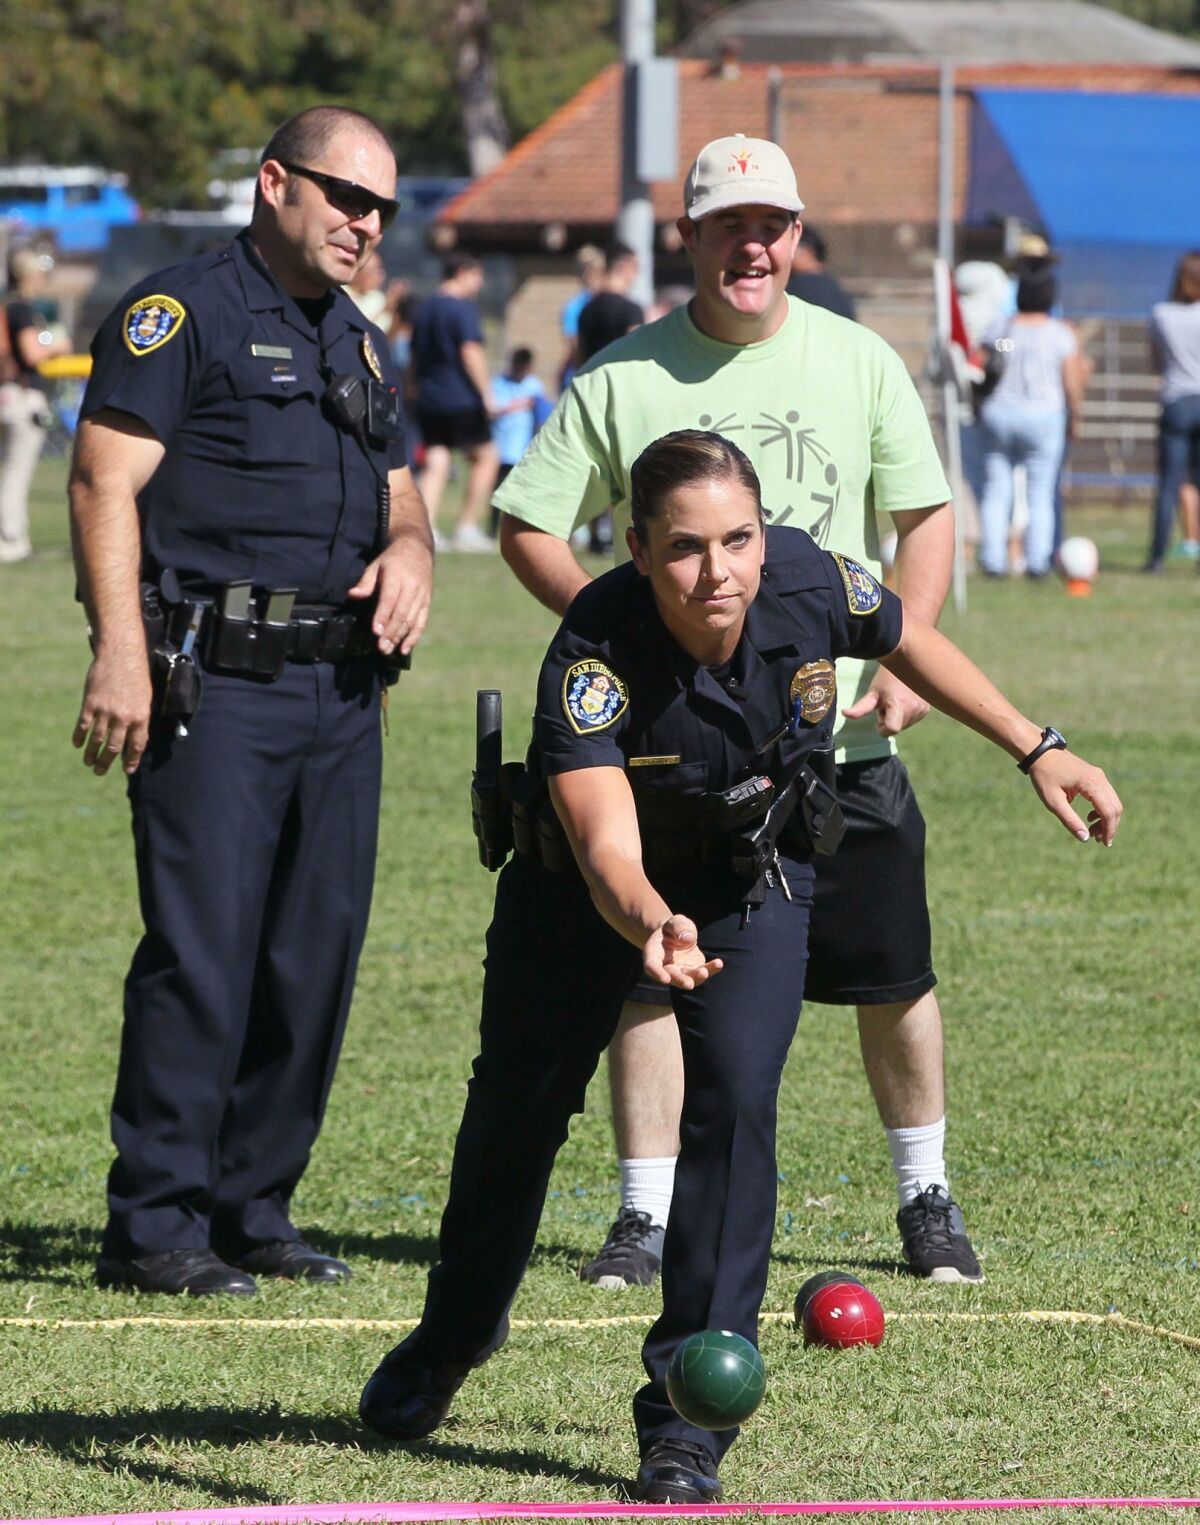 November 7, 2015_San Diego, California_USA_| At Rancho Bernardo Recreation Park San Diego Police Officer Jacki Lowry rolls a bocce ball during bocce ball competition at the San Diego County Regional Fall Games of the Special Olympics. Watching are teammates Officer Vito Messineo, left, and Special Olympics athlete Billy Lockett. |_Mandatory Photo Credit: Photo by Charlie Neuman/San Diego Union-Tribune/©2015 San Diego Union-Tribune, LLC San Diego Union-Tribune